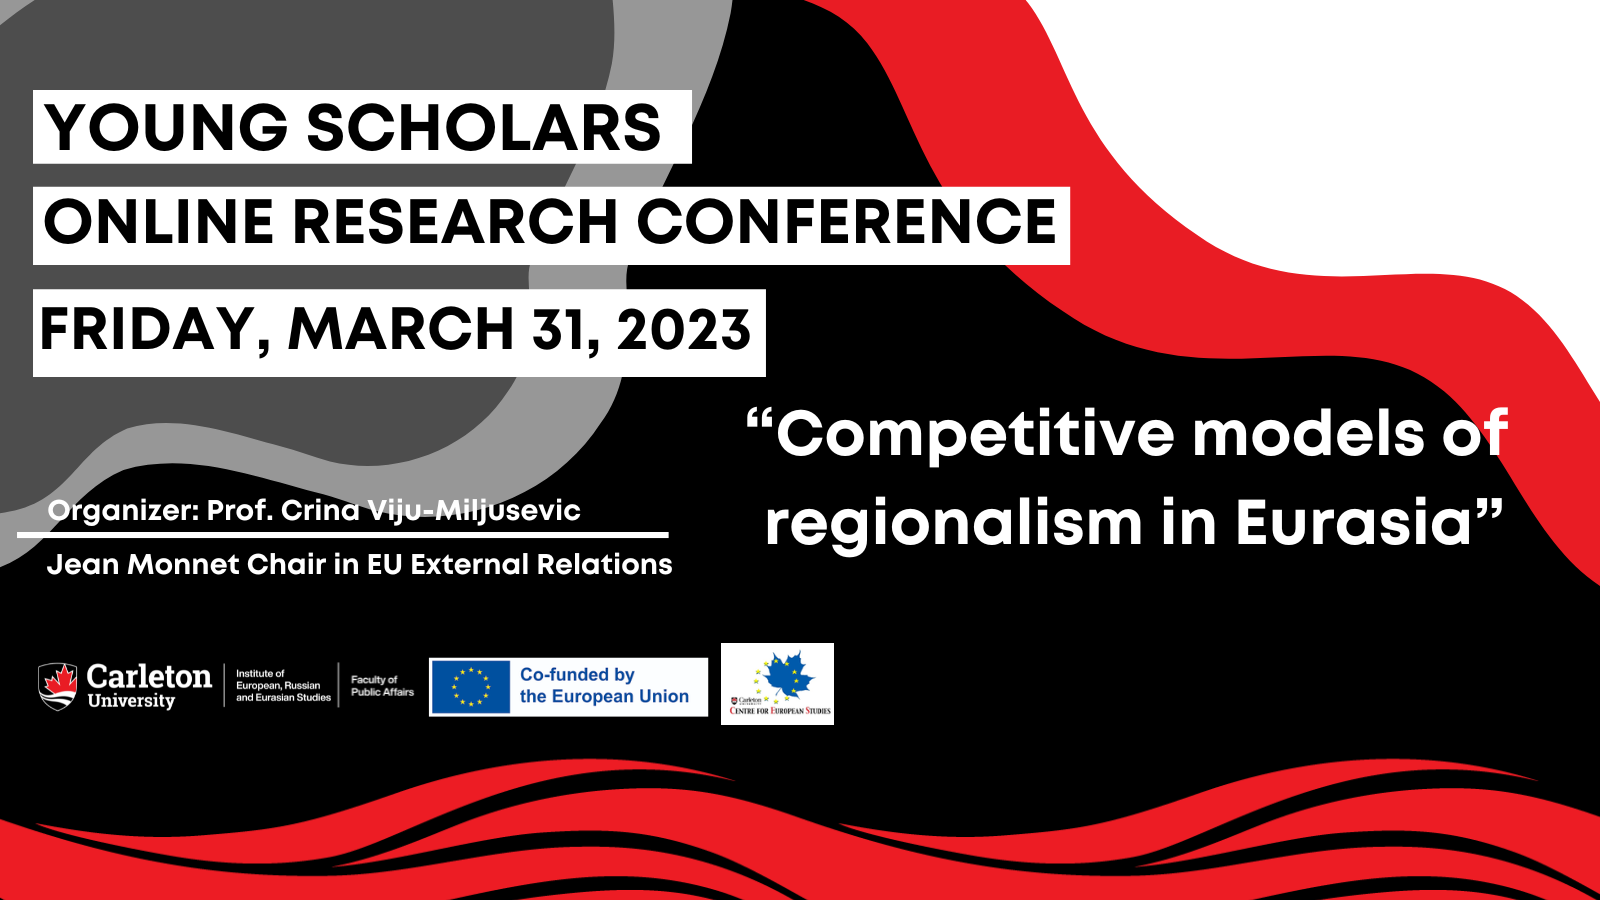 The Jean Monnet Chair in EU External Relations is hosting a young scholars one-day research conference. The theme of the conference is “Regionalism in Eurasia”. The conference will be hosted as an online event